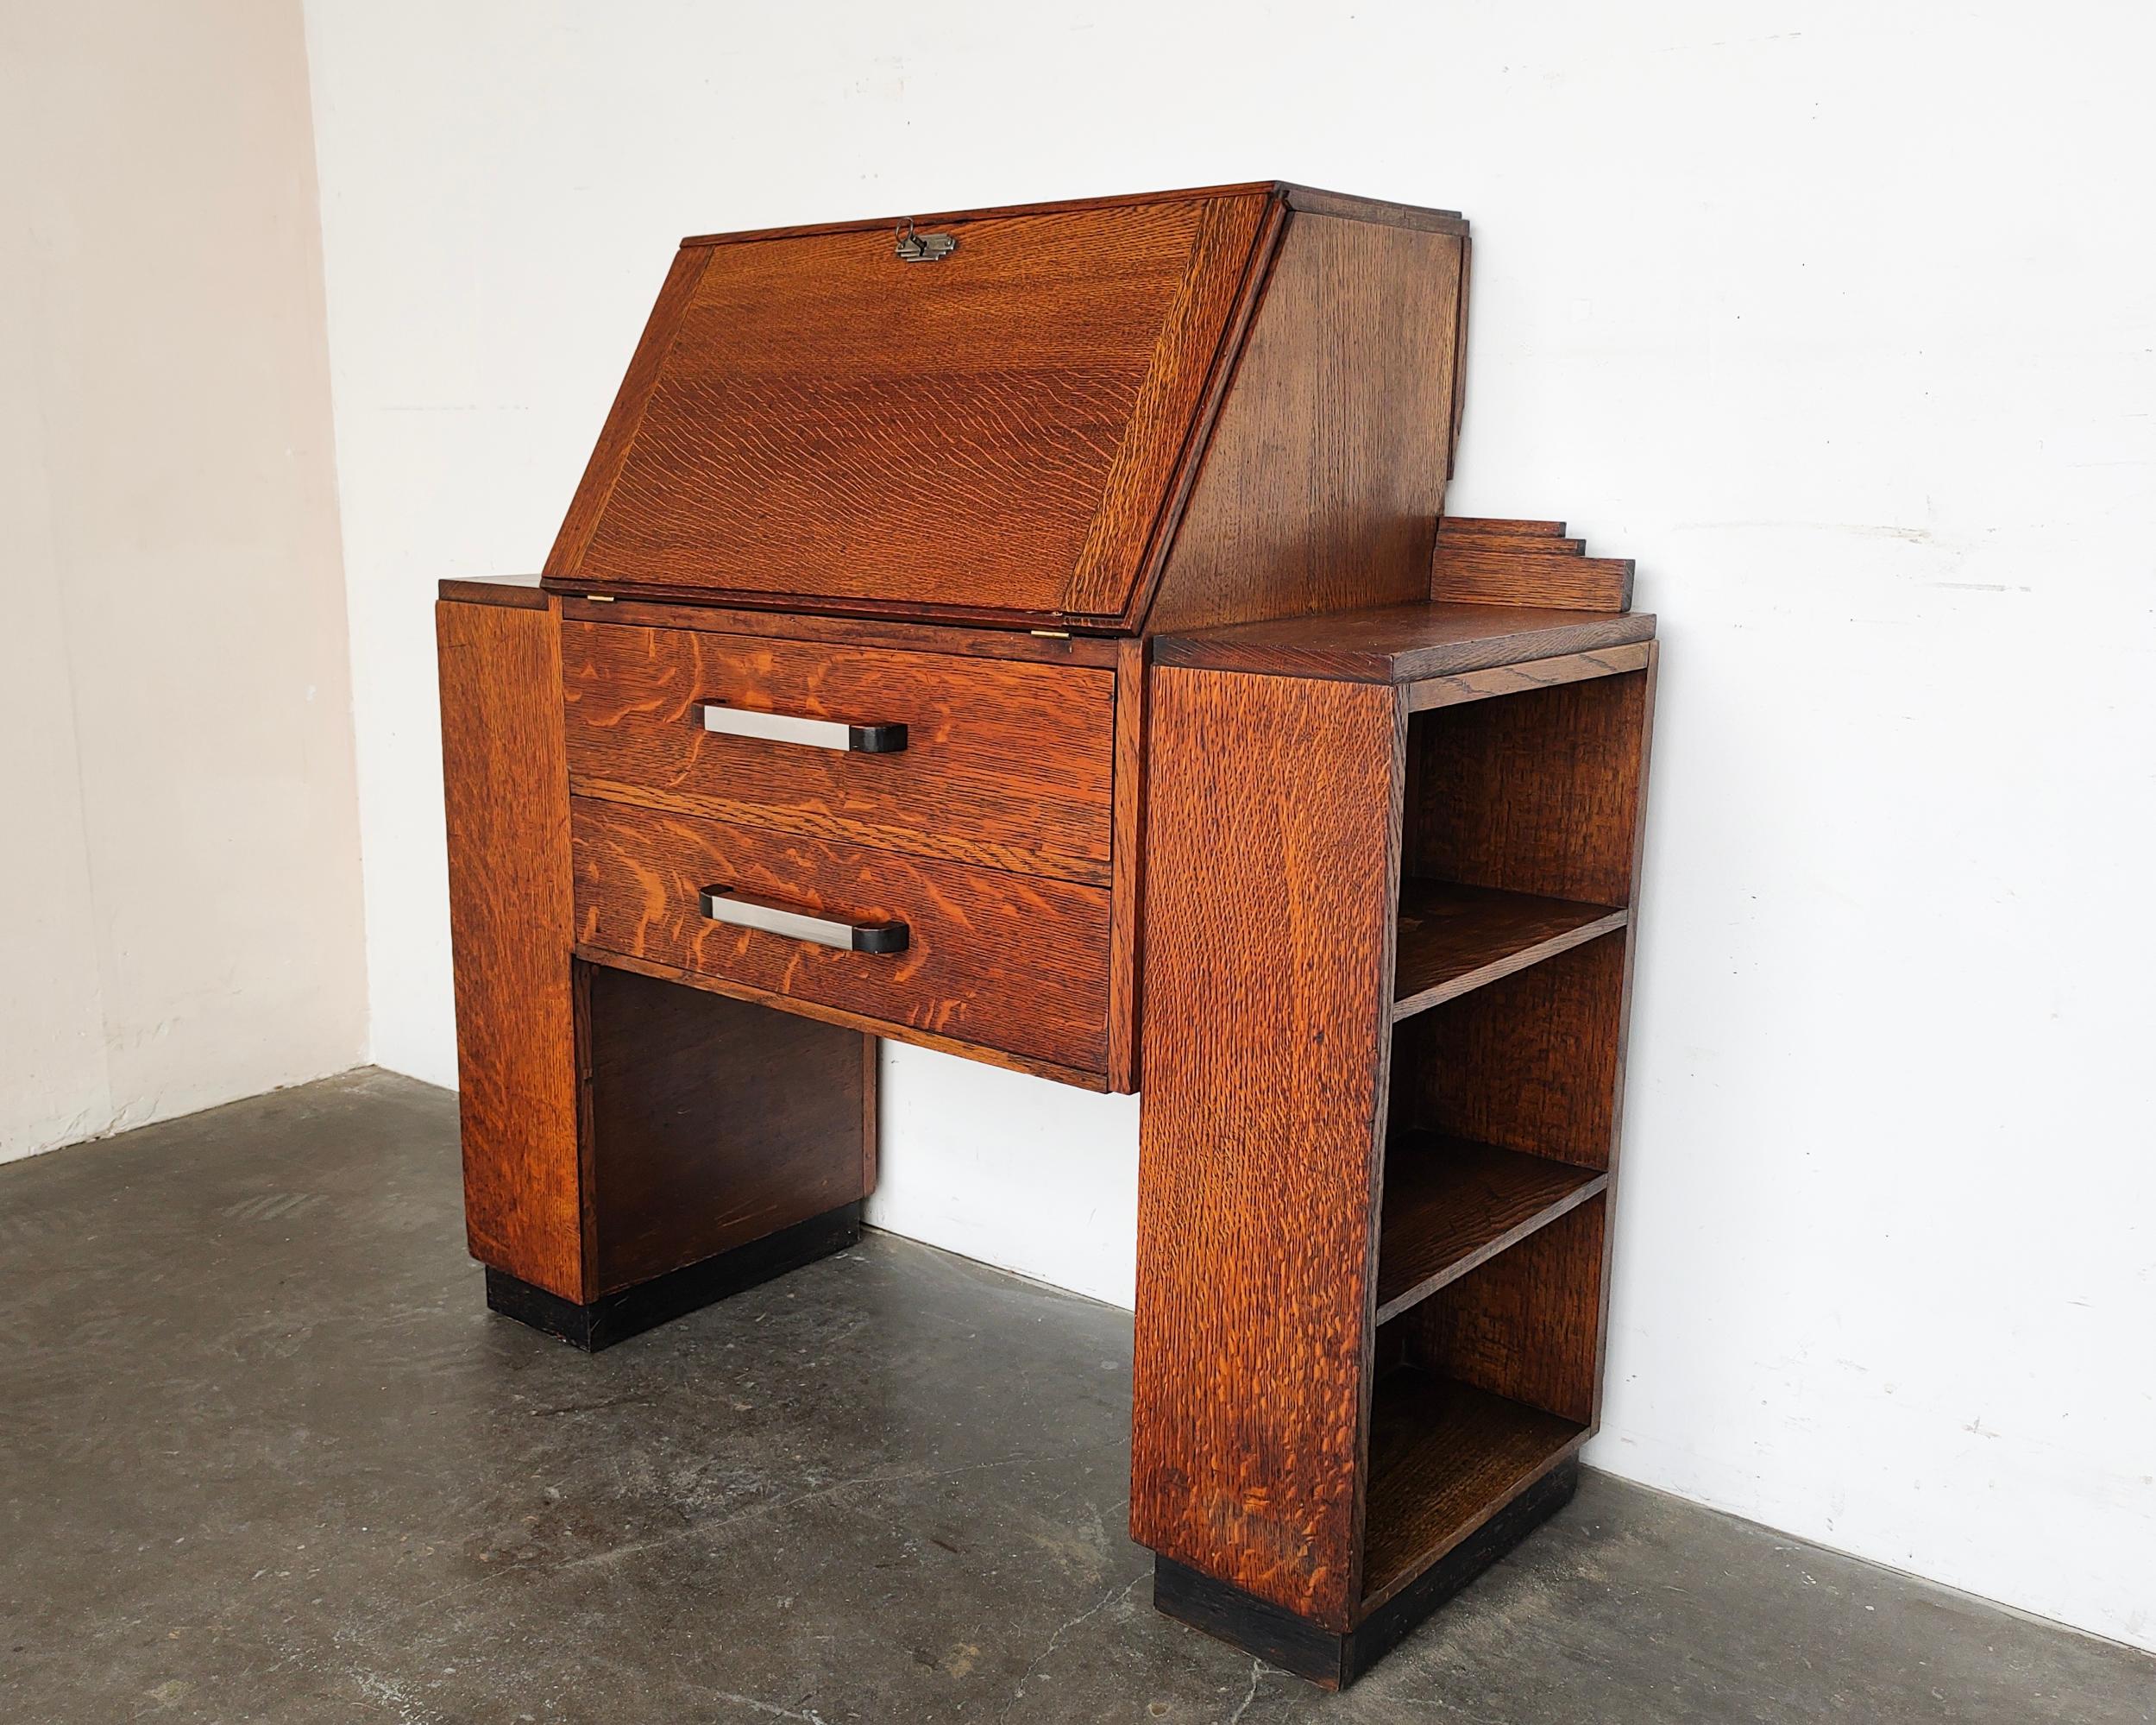 Beautiful Art Deco bureau bookcase / secretary desk. Solid tiger oak construction featuring open bookshelves on each side. Two drawers in the center with original metal and contrasting wood pulls. Drop-down cabinet door opens to writing surface,